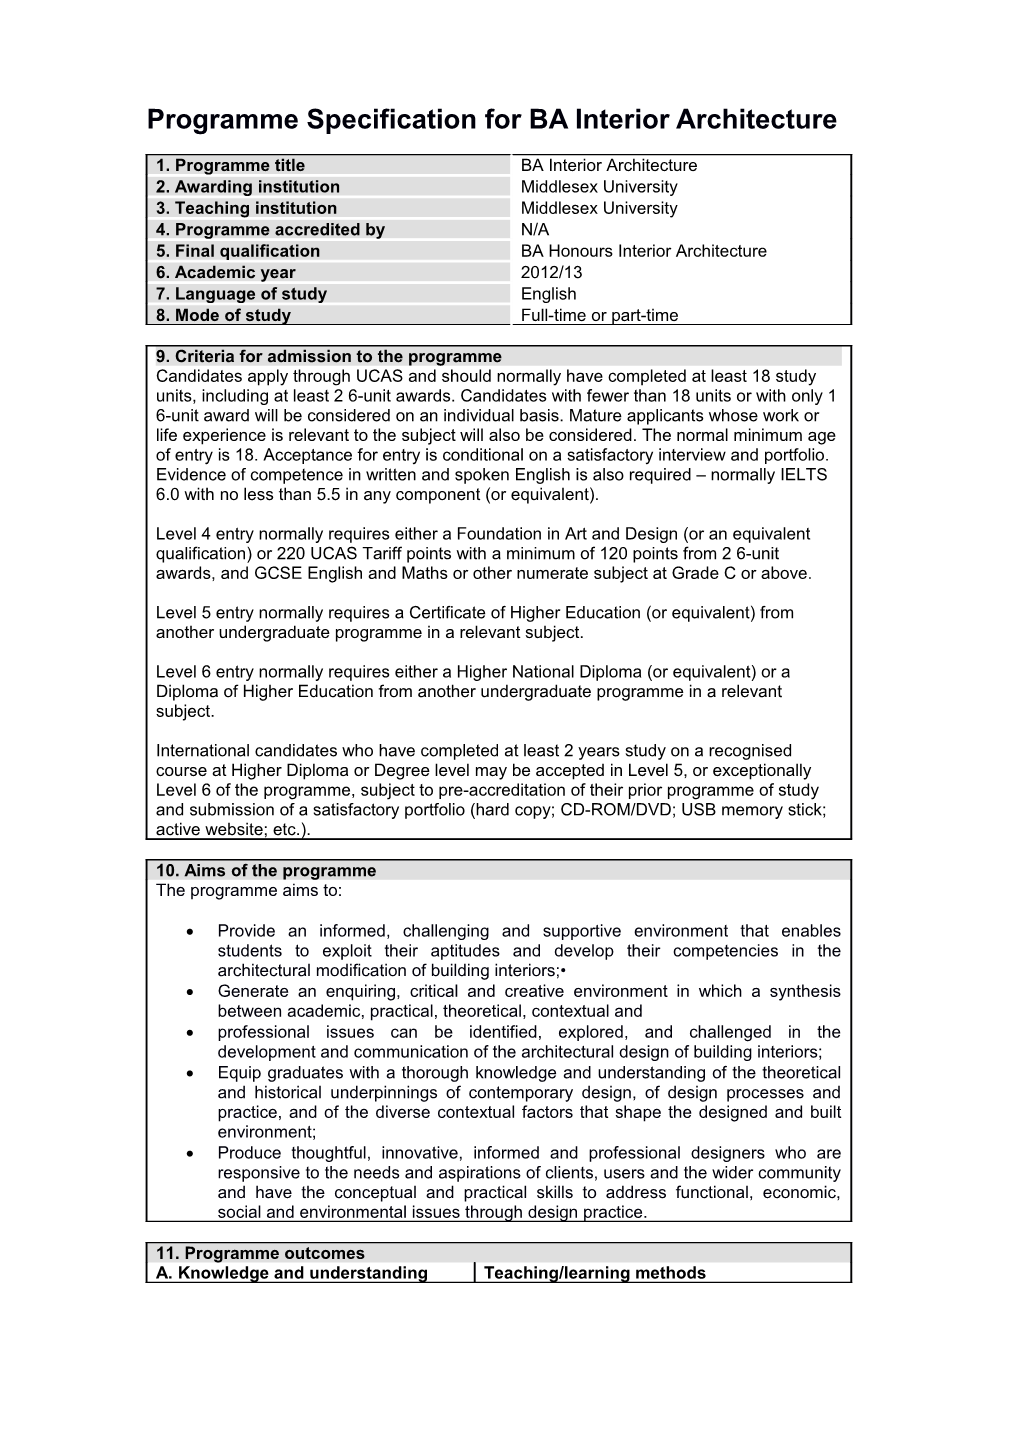 Programme Specification for BA Interior Architecture